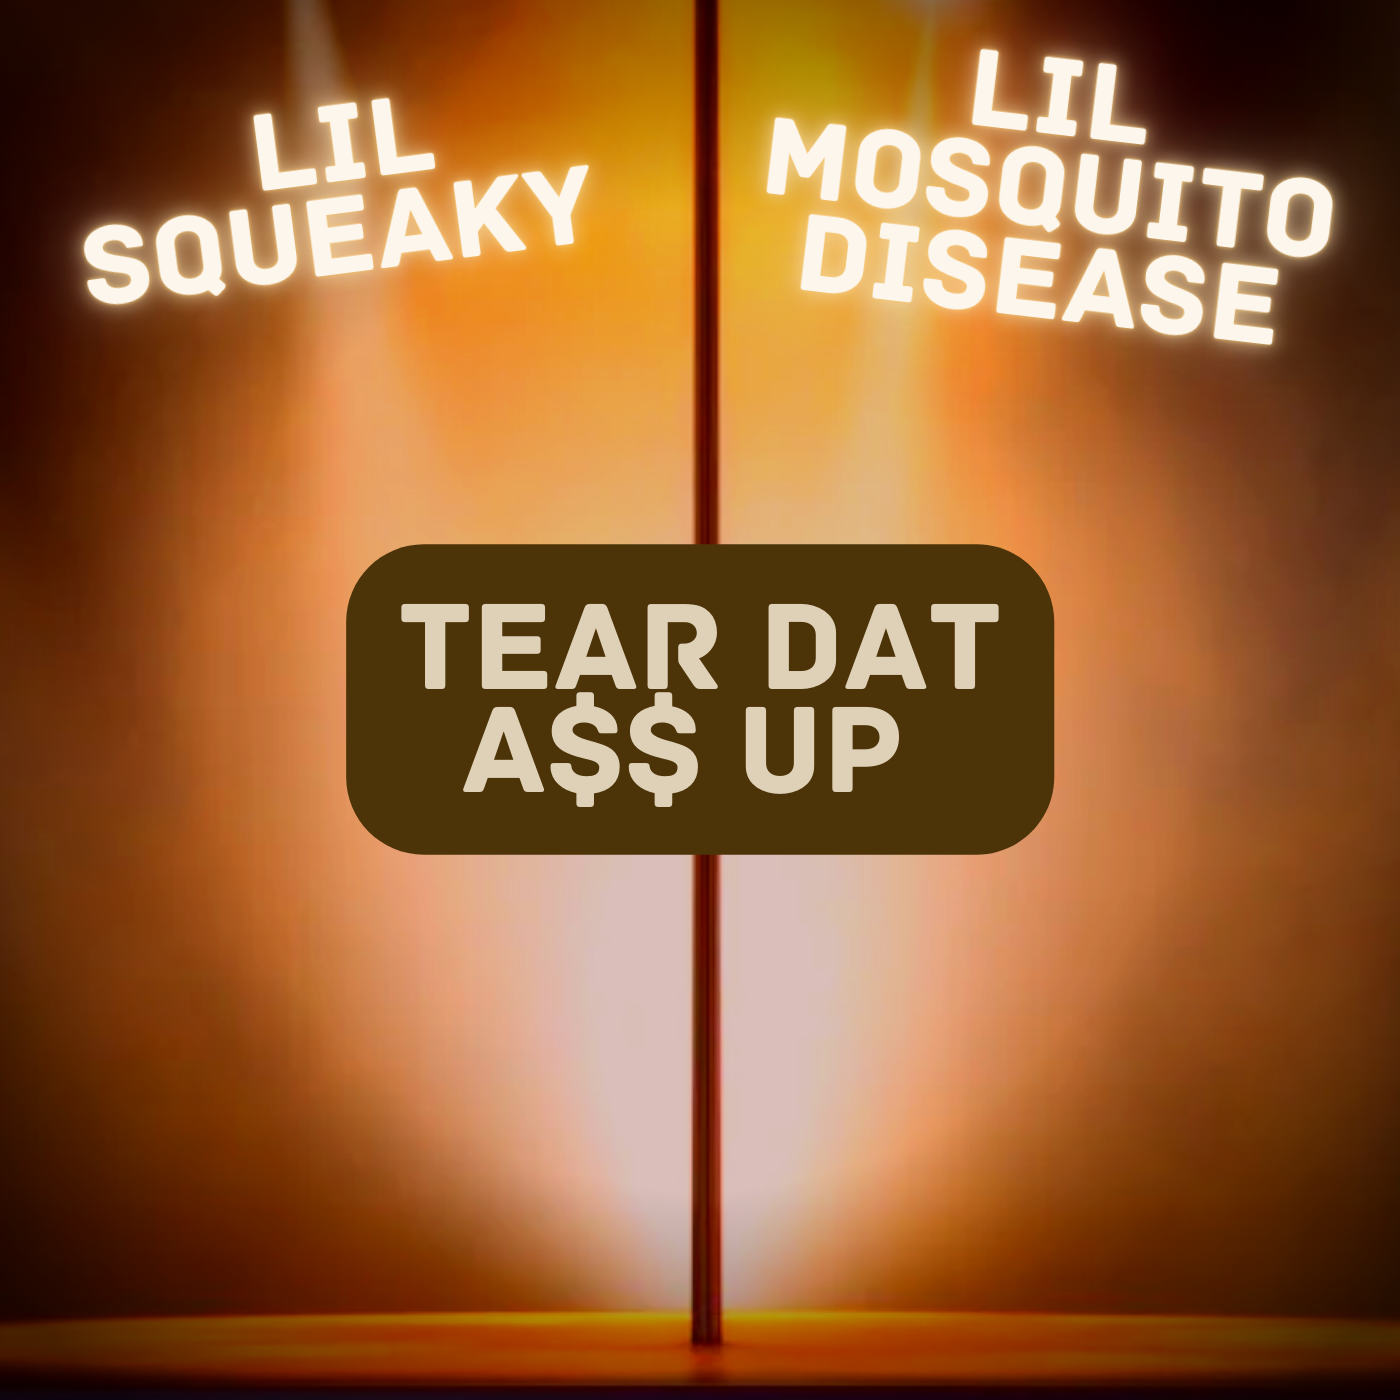 Lil Squeaky & Lil Mosquito Disease Tear Dat A$$ Up cover artwork